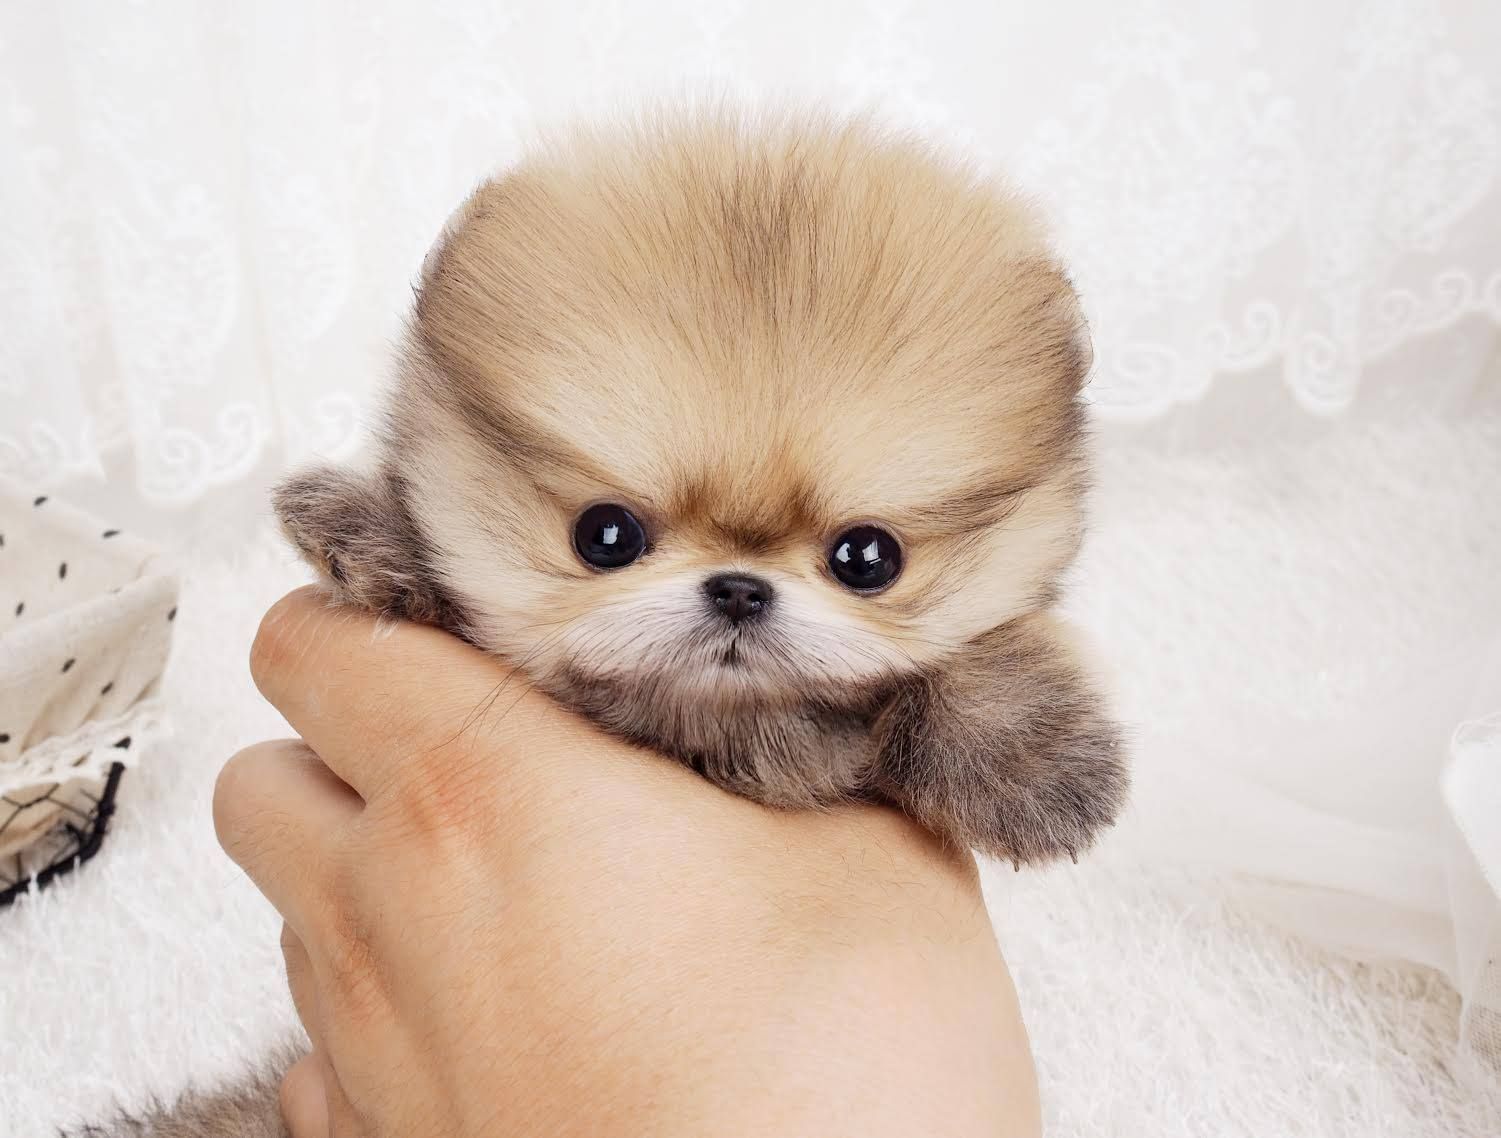 Boo puppy, micro Pomeranian, tiny teacup dogs, expensive dogs